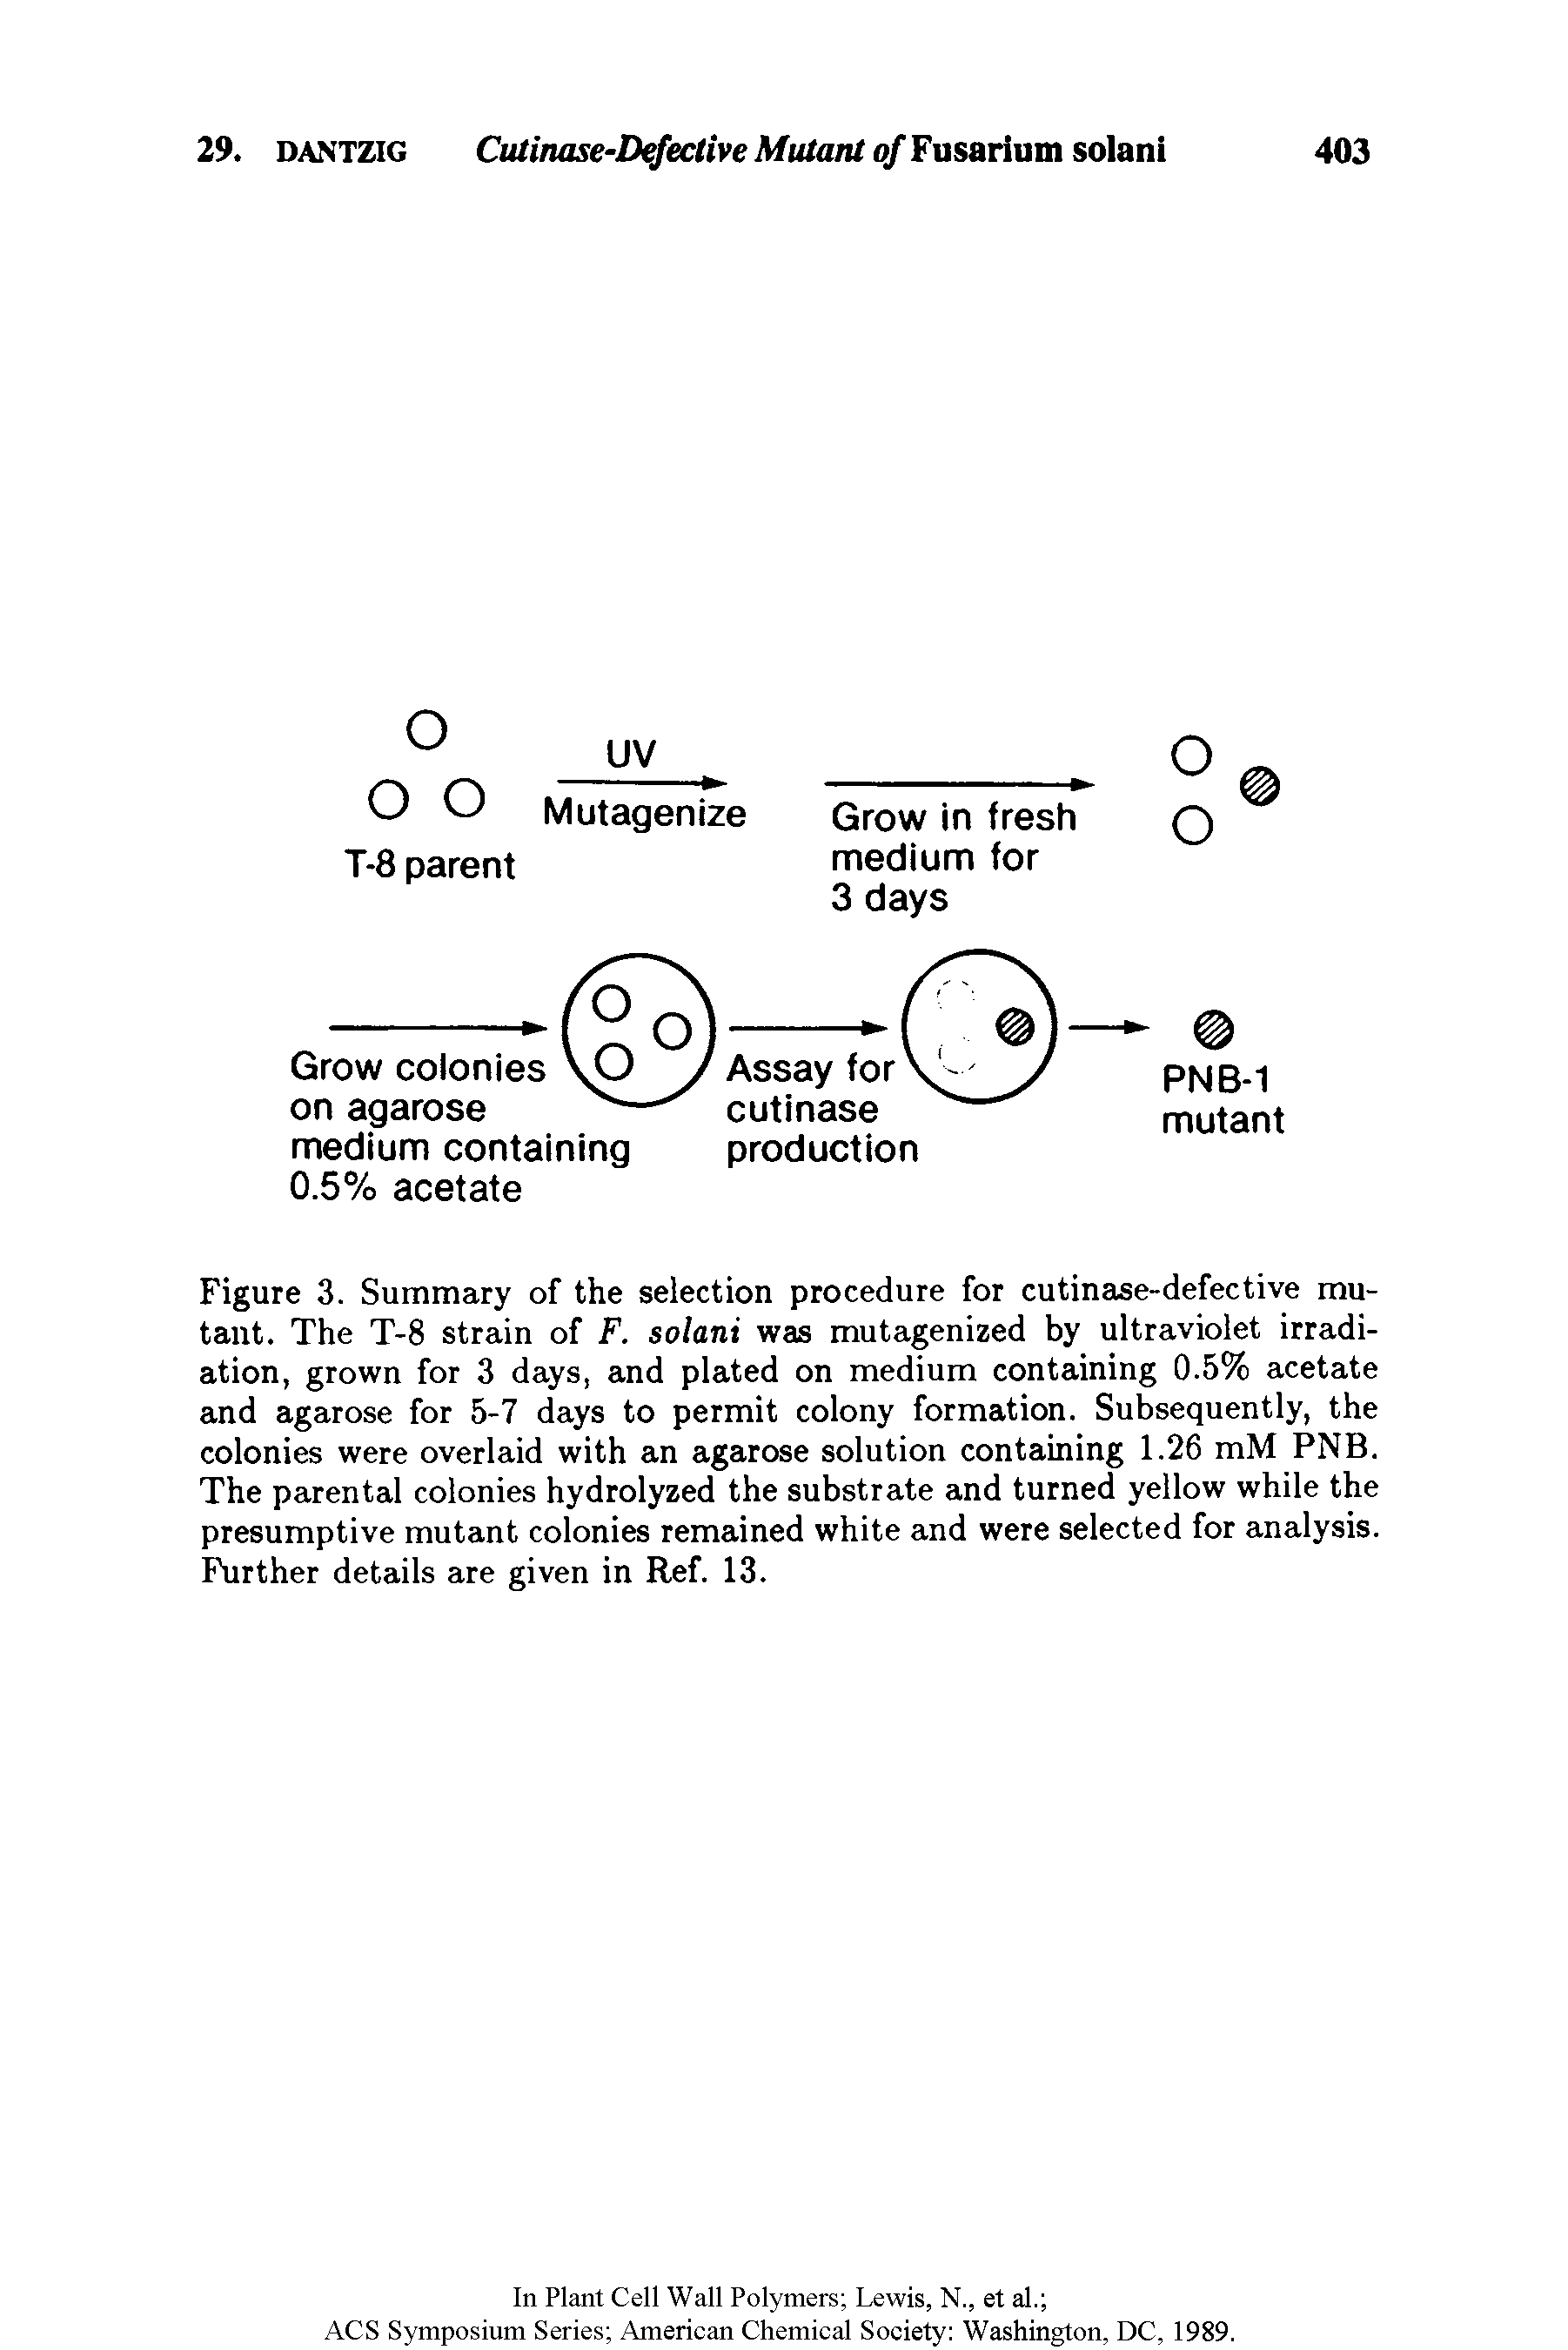 Figure 3. Summary of the selection procedure for cutinase-defective mutant. The T-8 strain of F. solani was mutagenized by ultraviolet irradiation, grown for 3 days, and plated on medium containing 0.5% acetate and agarose for 5-7 days to permit colony formation. Subsequently, the colonies were overlaid with an agarose solution containing 1.26 mM PNB. The parental colonies hydrolyzed the substrate and turned yellow while the presumptive mutant colonies remained white and were selected for analysis. Further details are given in Ref. 13.